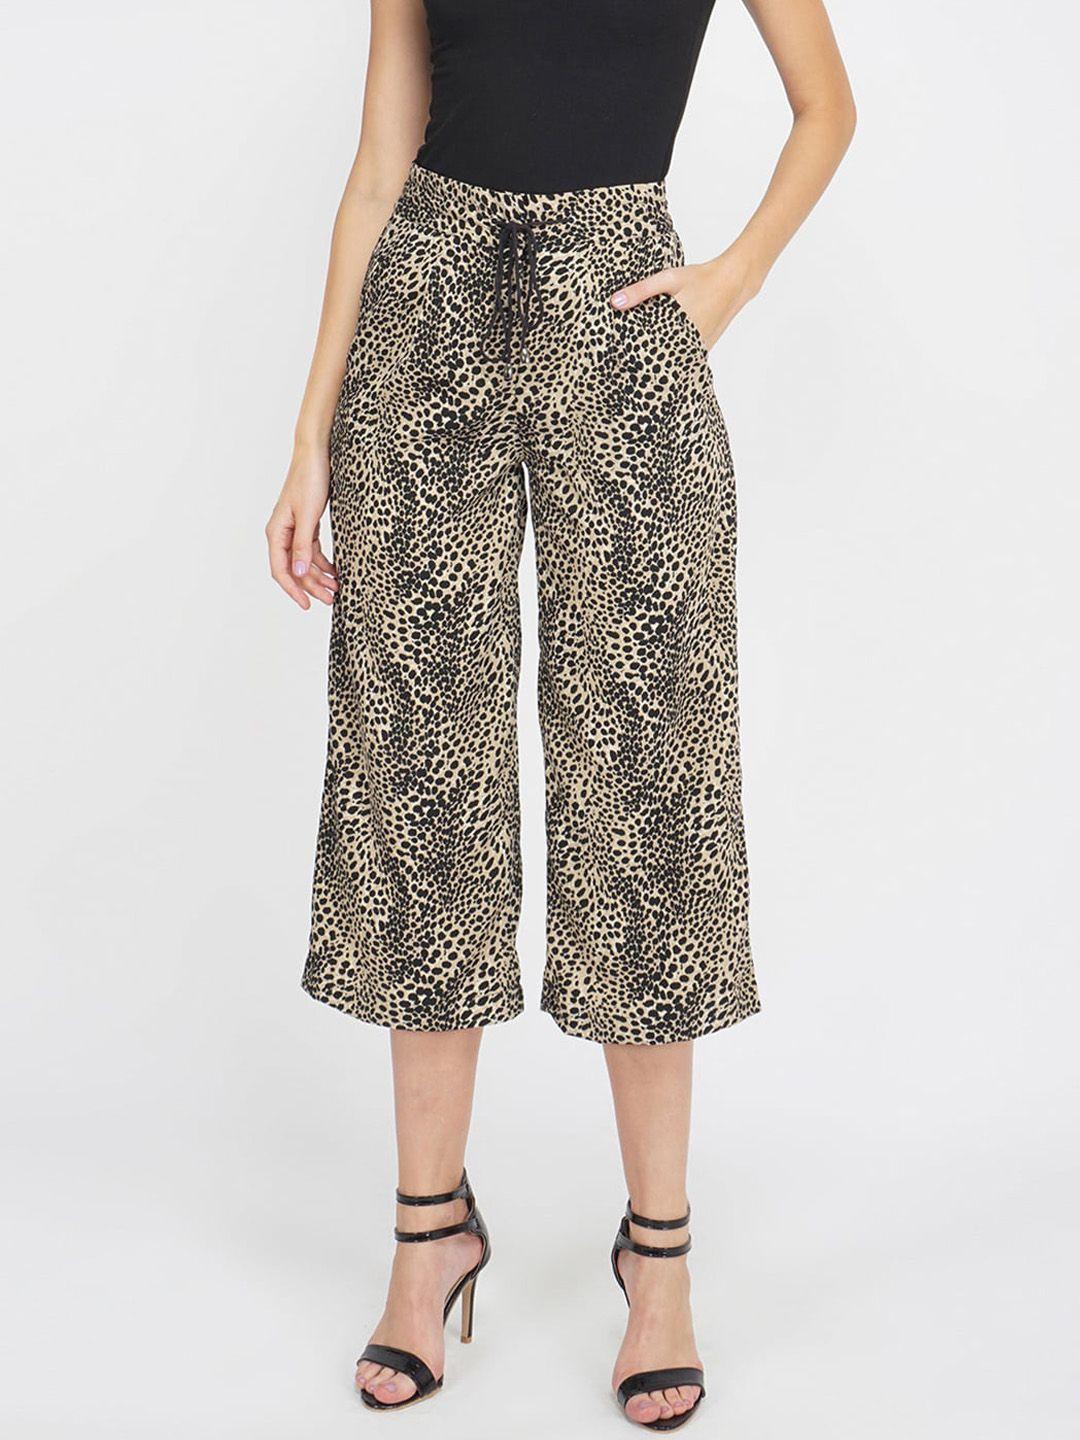 oxolloxo-women-beige-animal-printed-high-rise-culottes-trousers